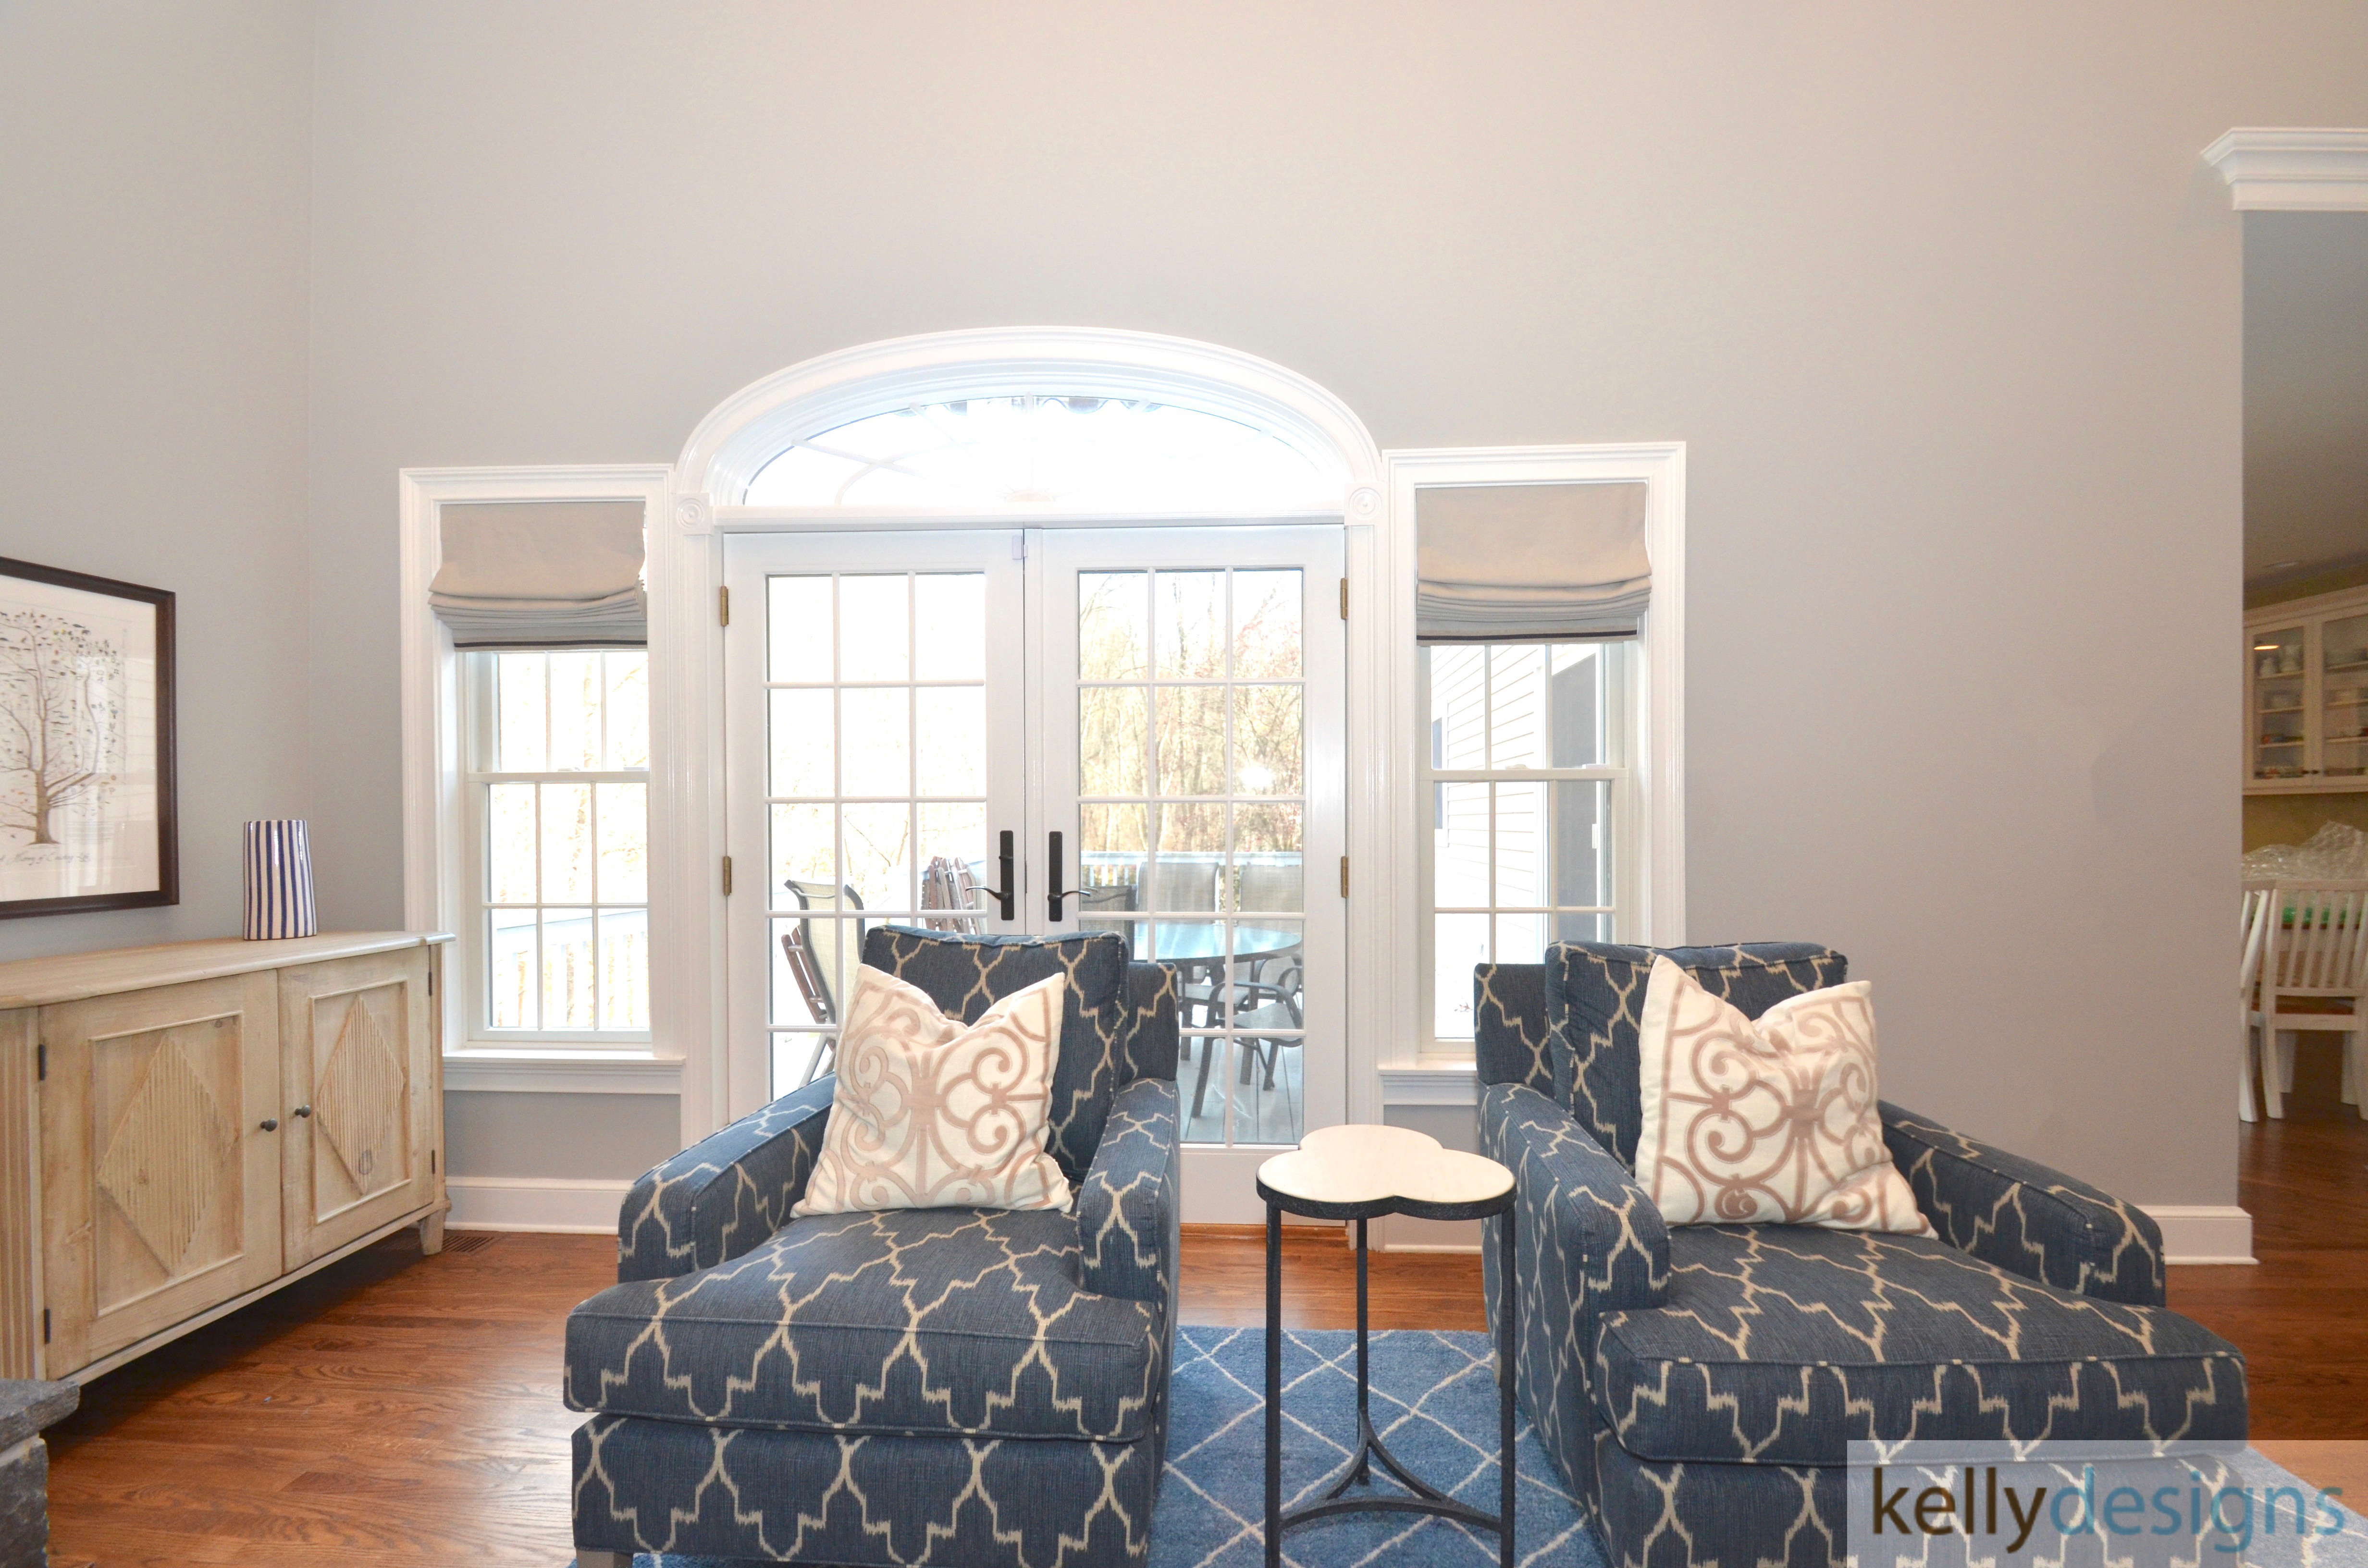 Delightful On Dudley   Family Room   Interior Design By Kellydesigns